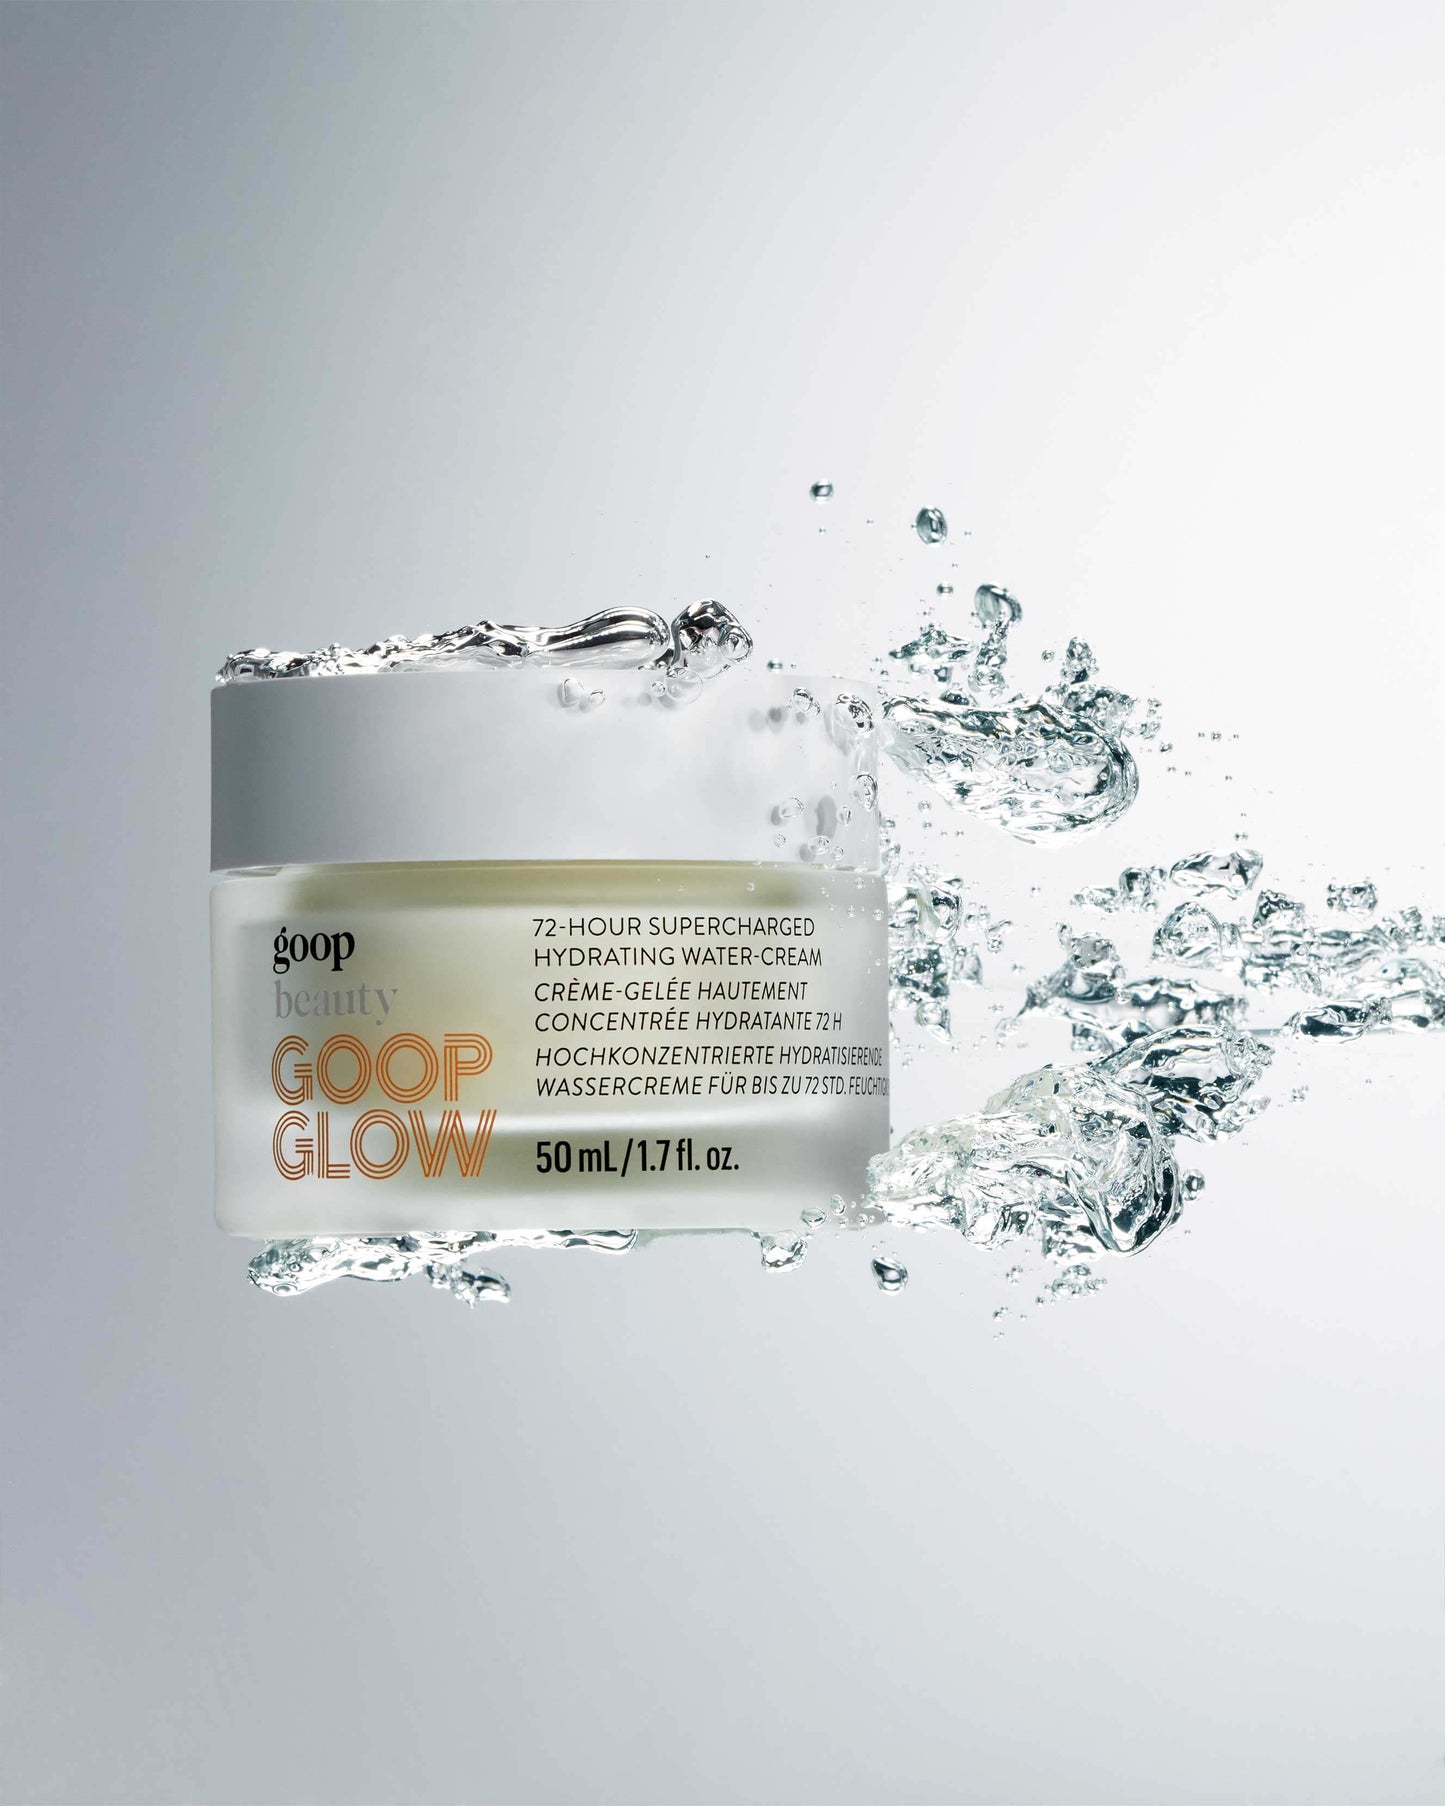 72-Hour Supercharged Hydrating Water-Cream